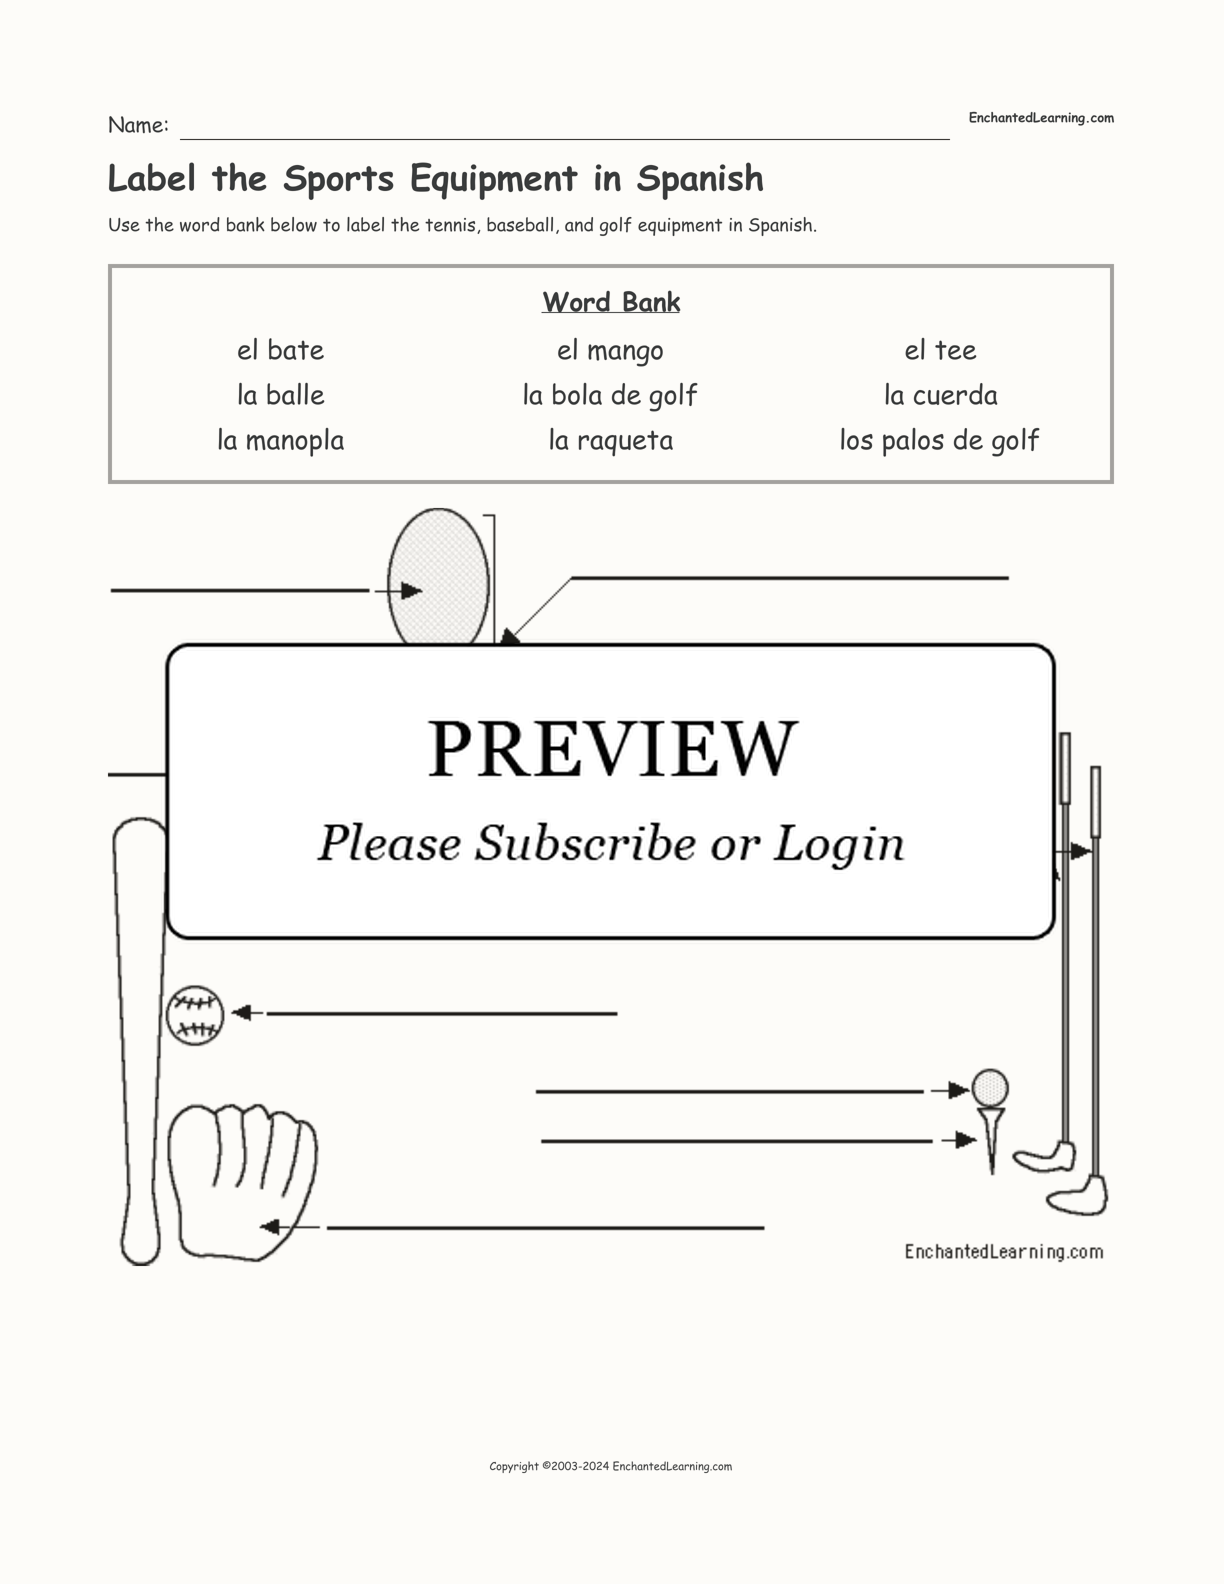 Label the Sports Equipment in Spanish interactive worksheet page 1